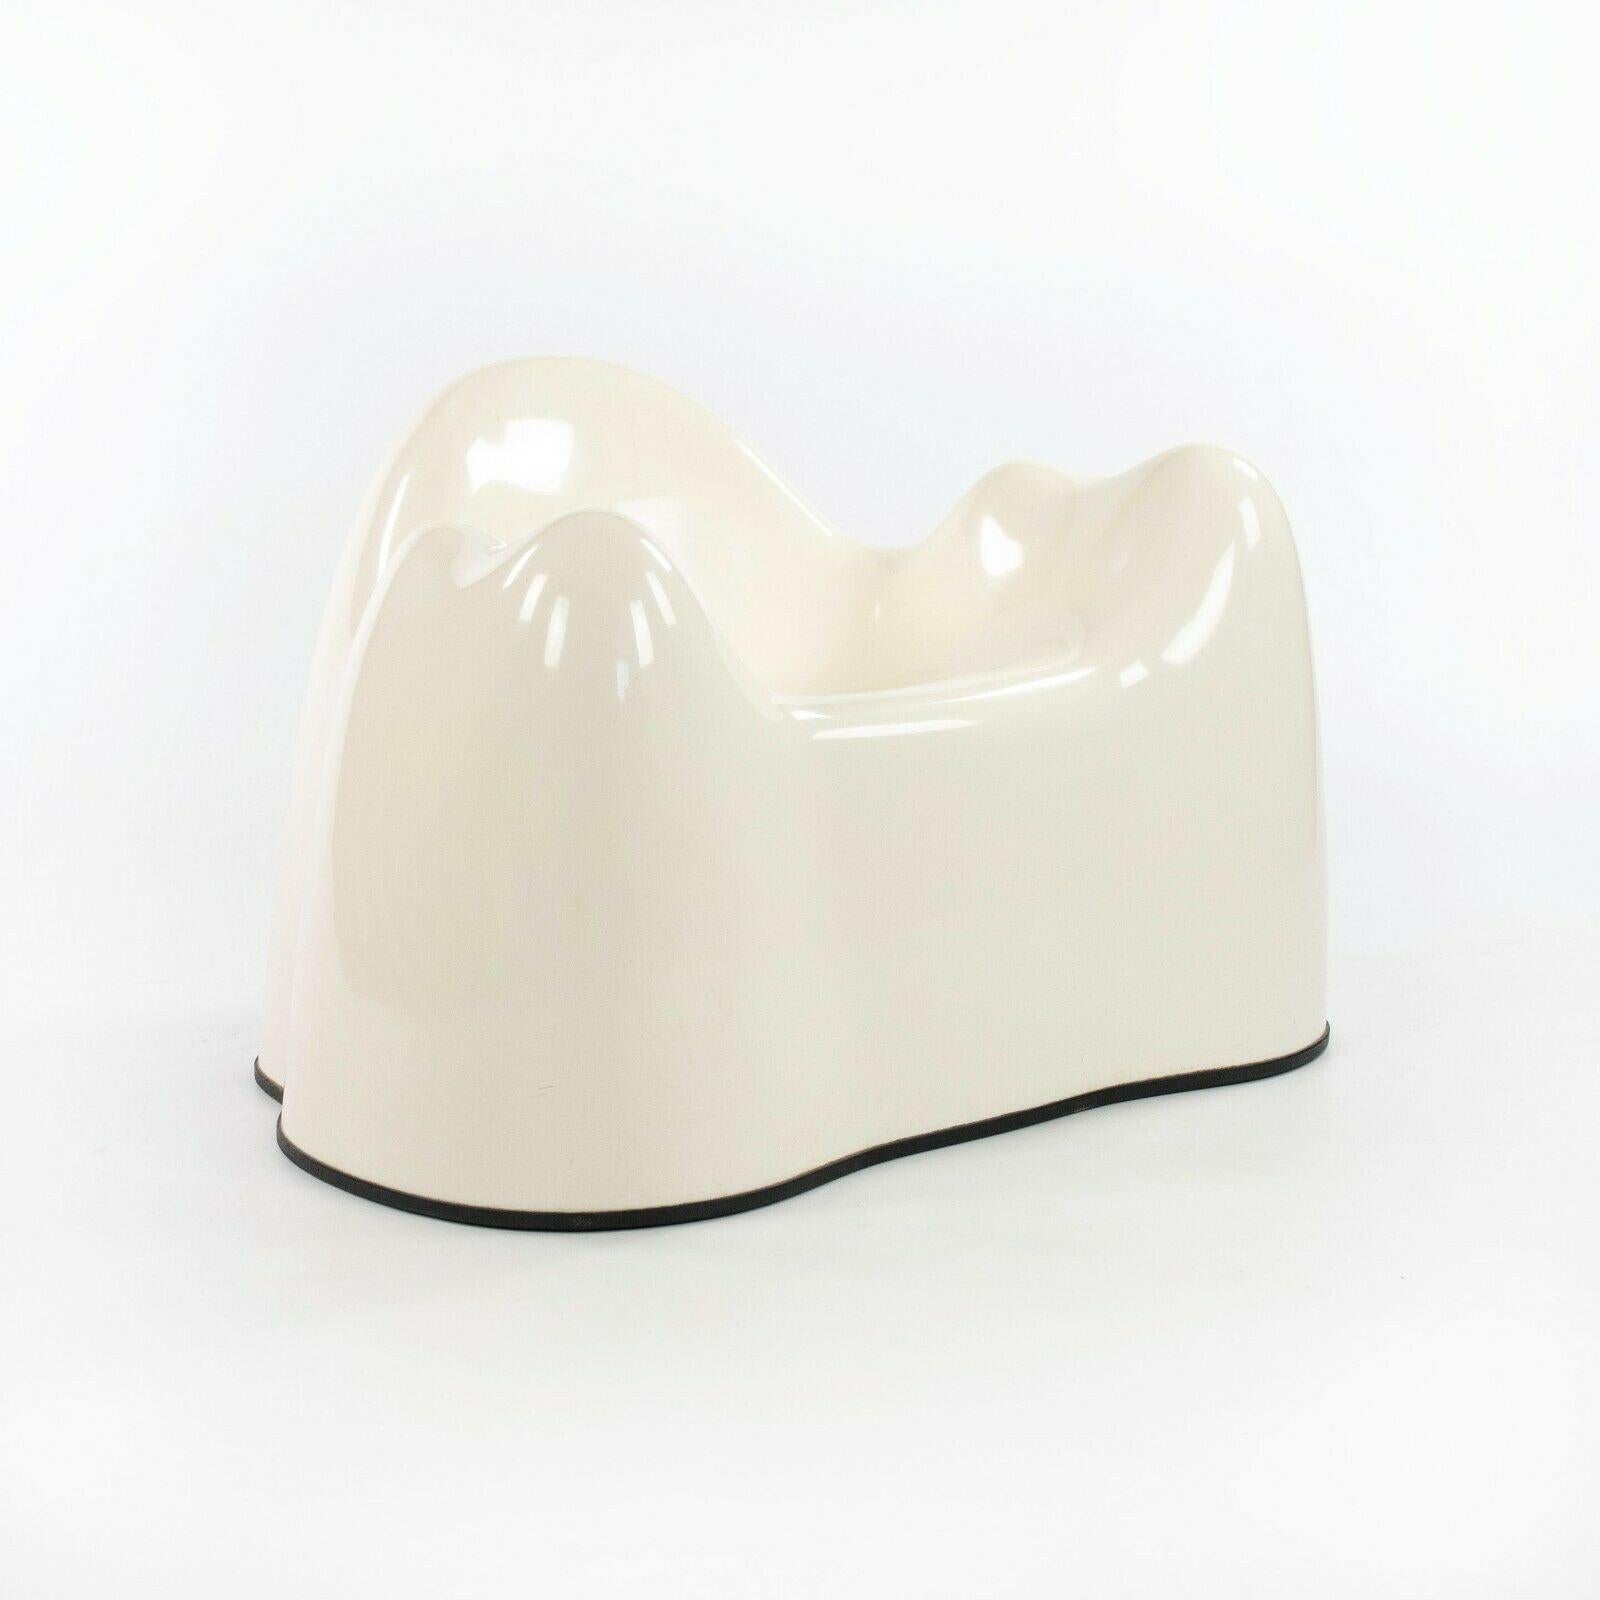 1970s Wendell Castle Molar Chair in Fiberglass by Northern Plastics of Syracuse In Good Condition For Sale In Philadelphia, PA